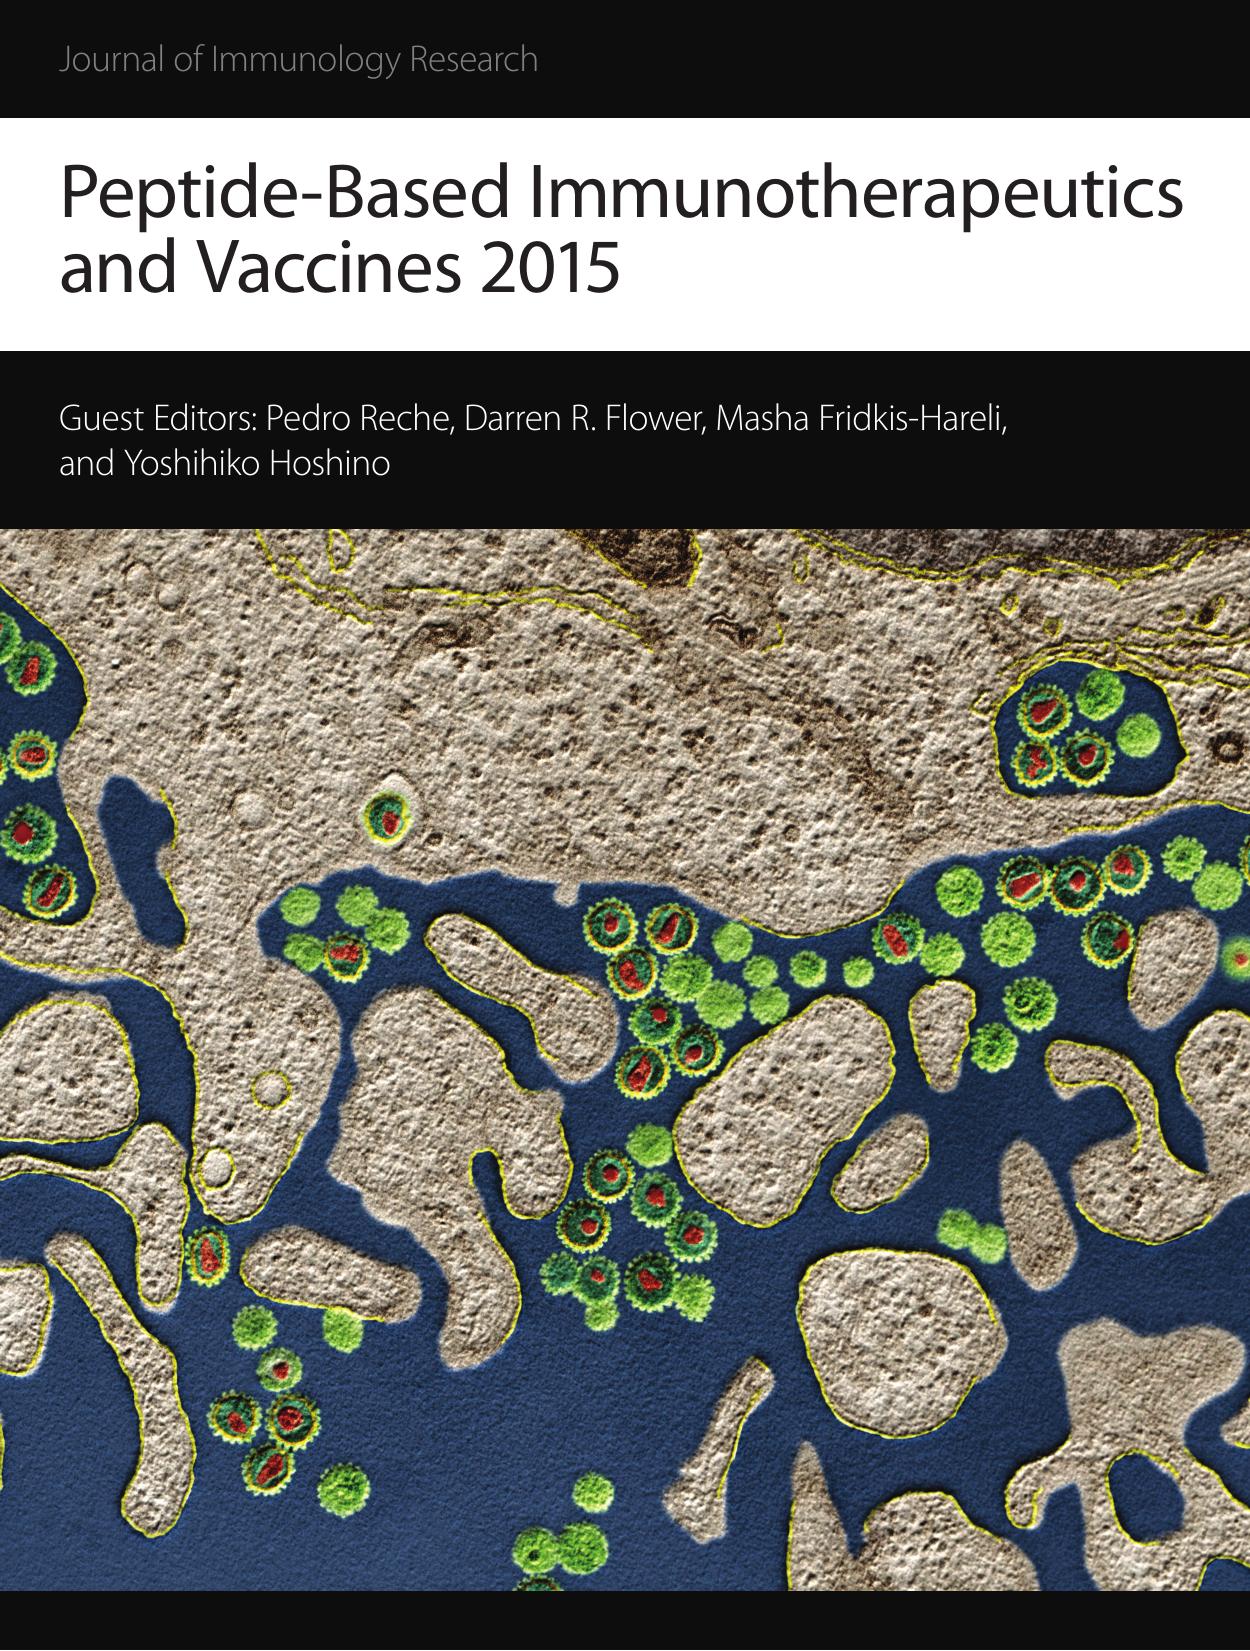 Peptide-Based Immunotherapeutics and Vaccines 2015